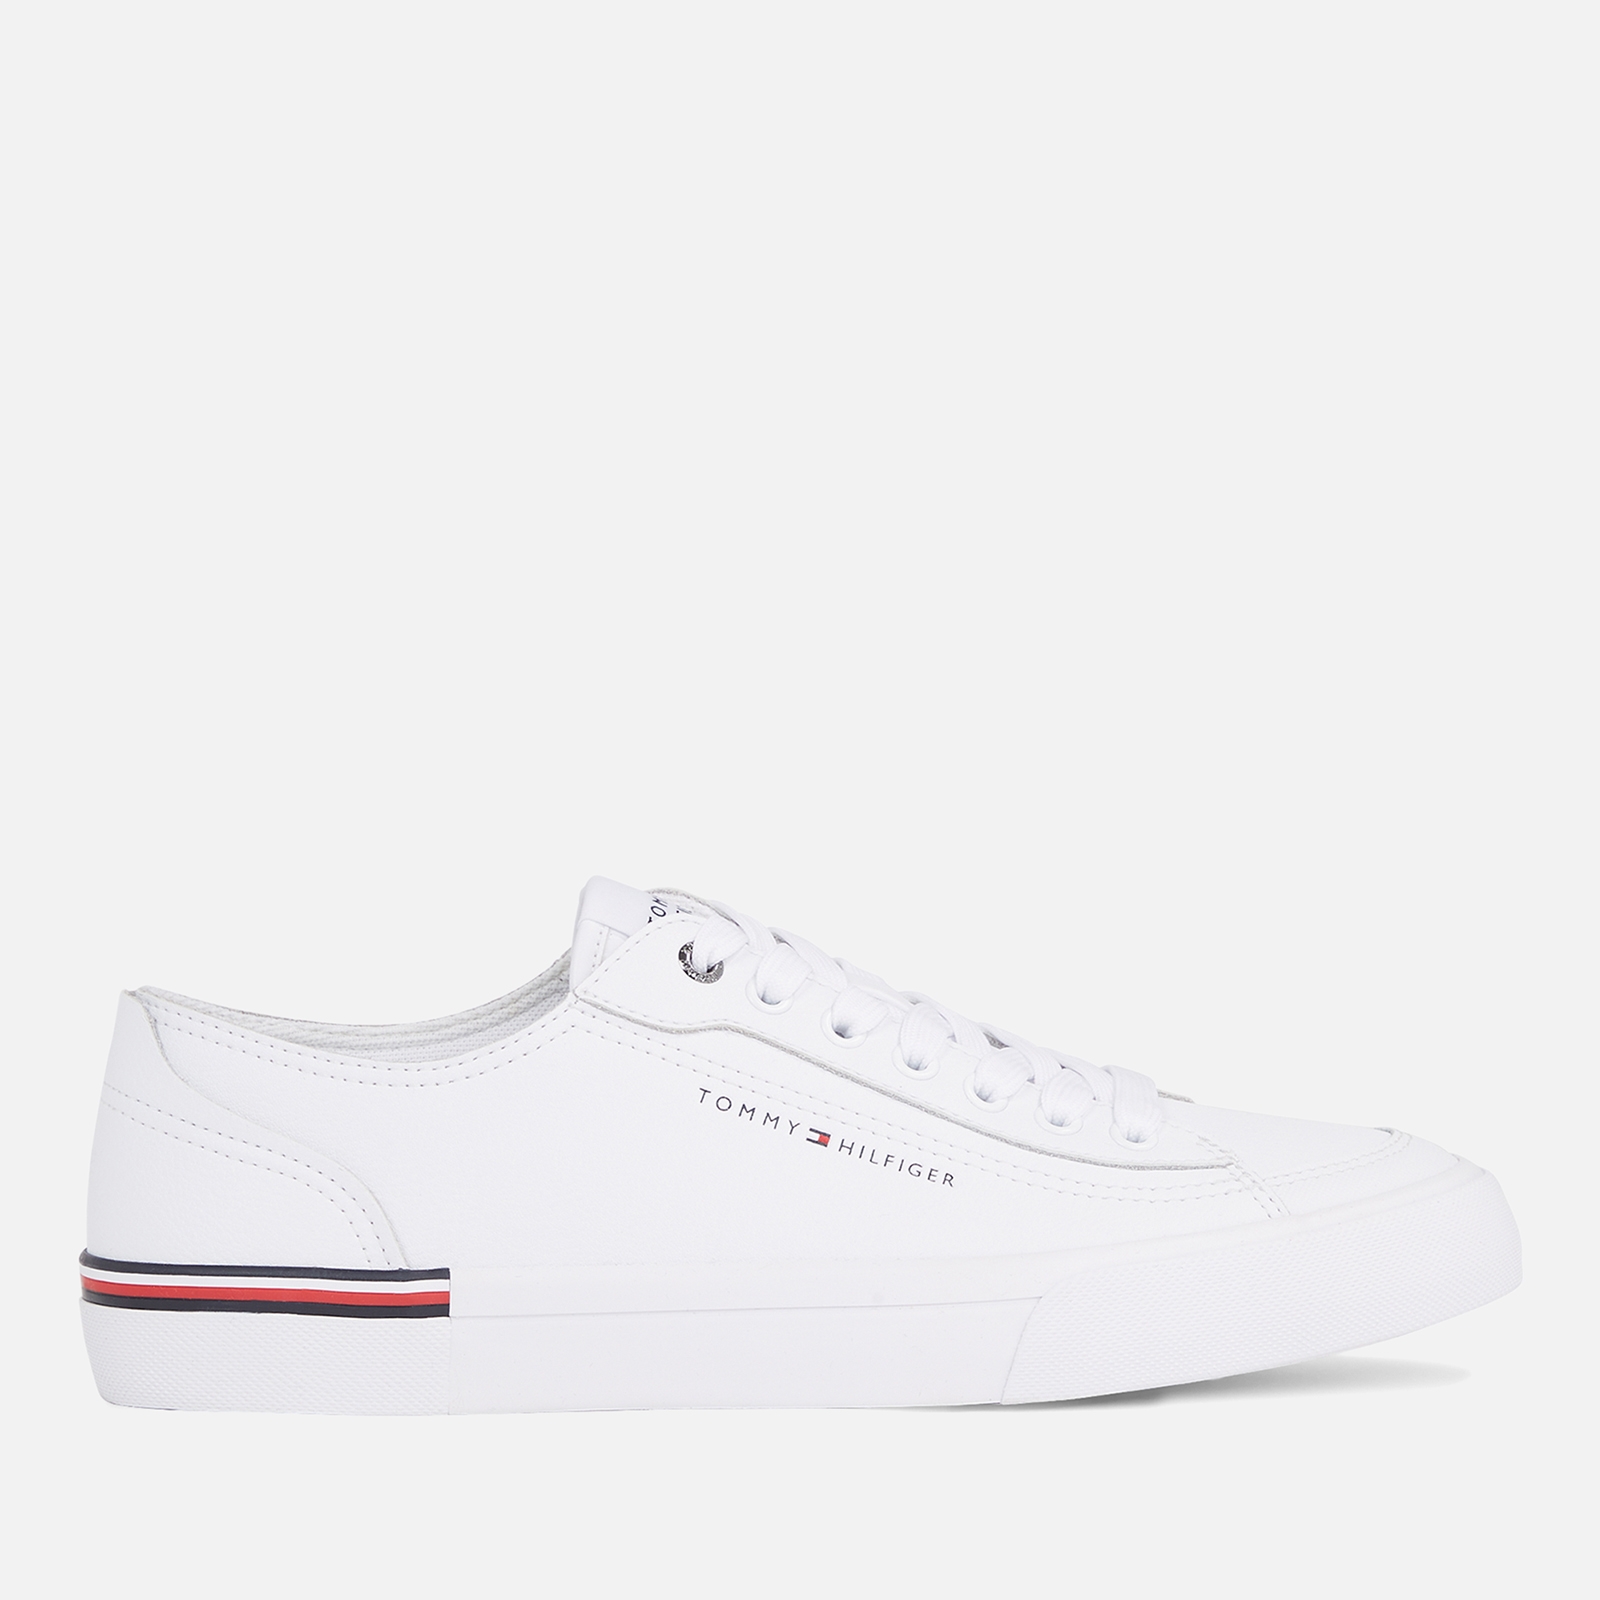 Tommy Hilfiger Men's Vulcanized Leather and Faux Leather Trainers